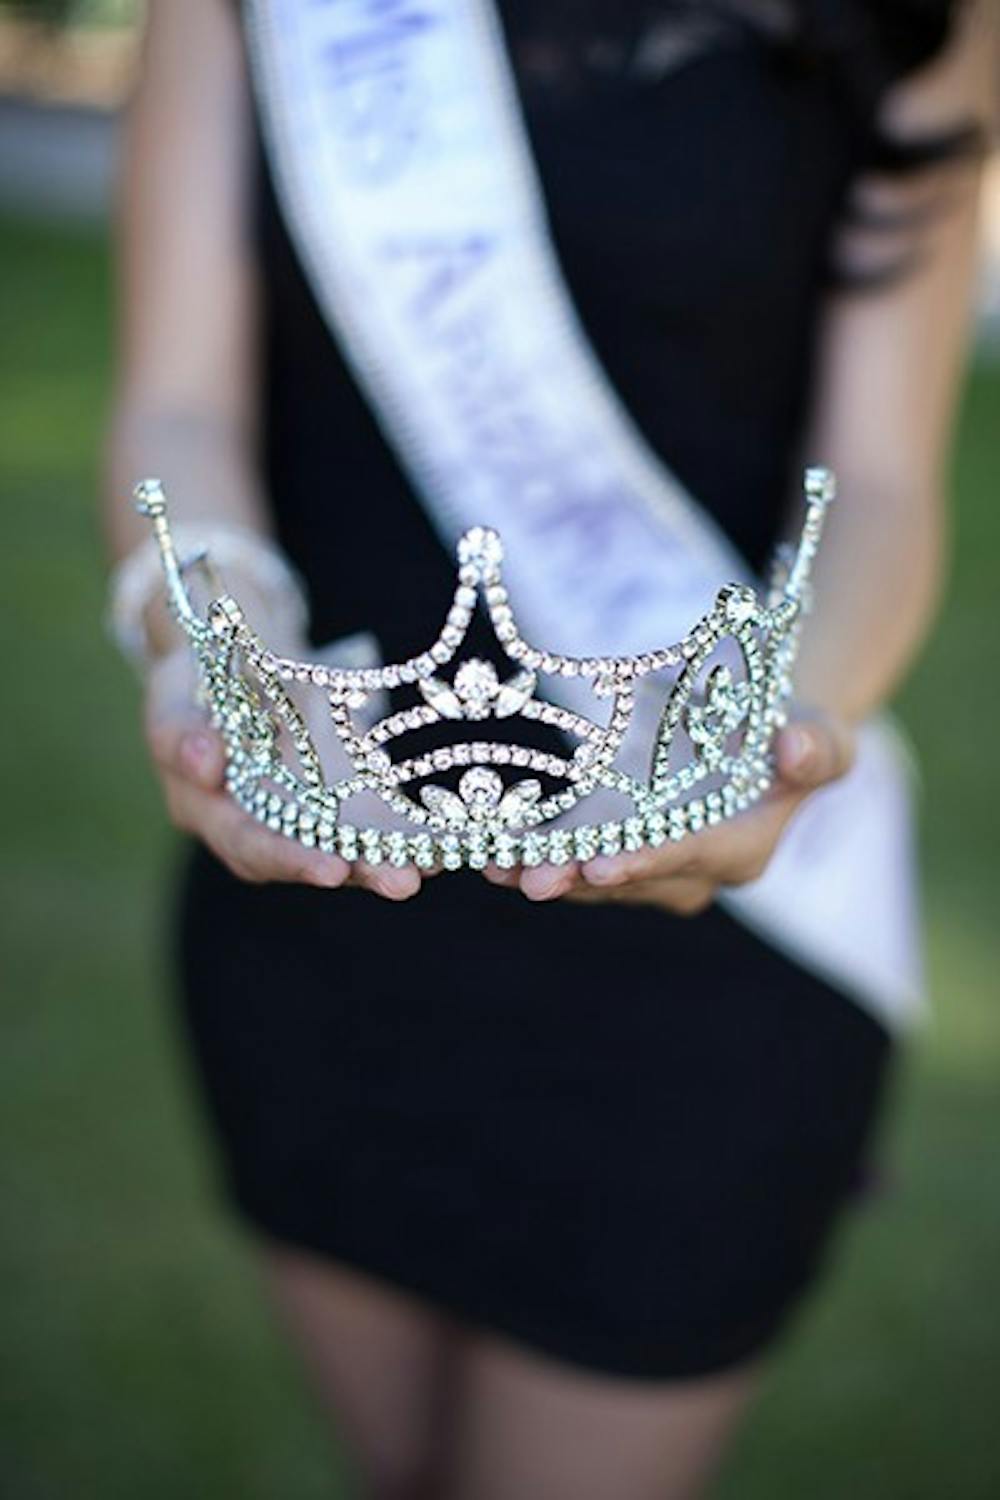 Brenda Soto presents her tiara that she was crowned with at the pageant after being named Miss Arizona Latina 2013. (Photo by Ryan Liu)